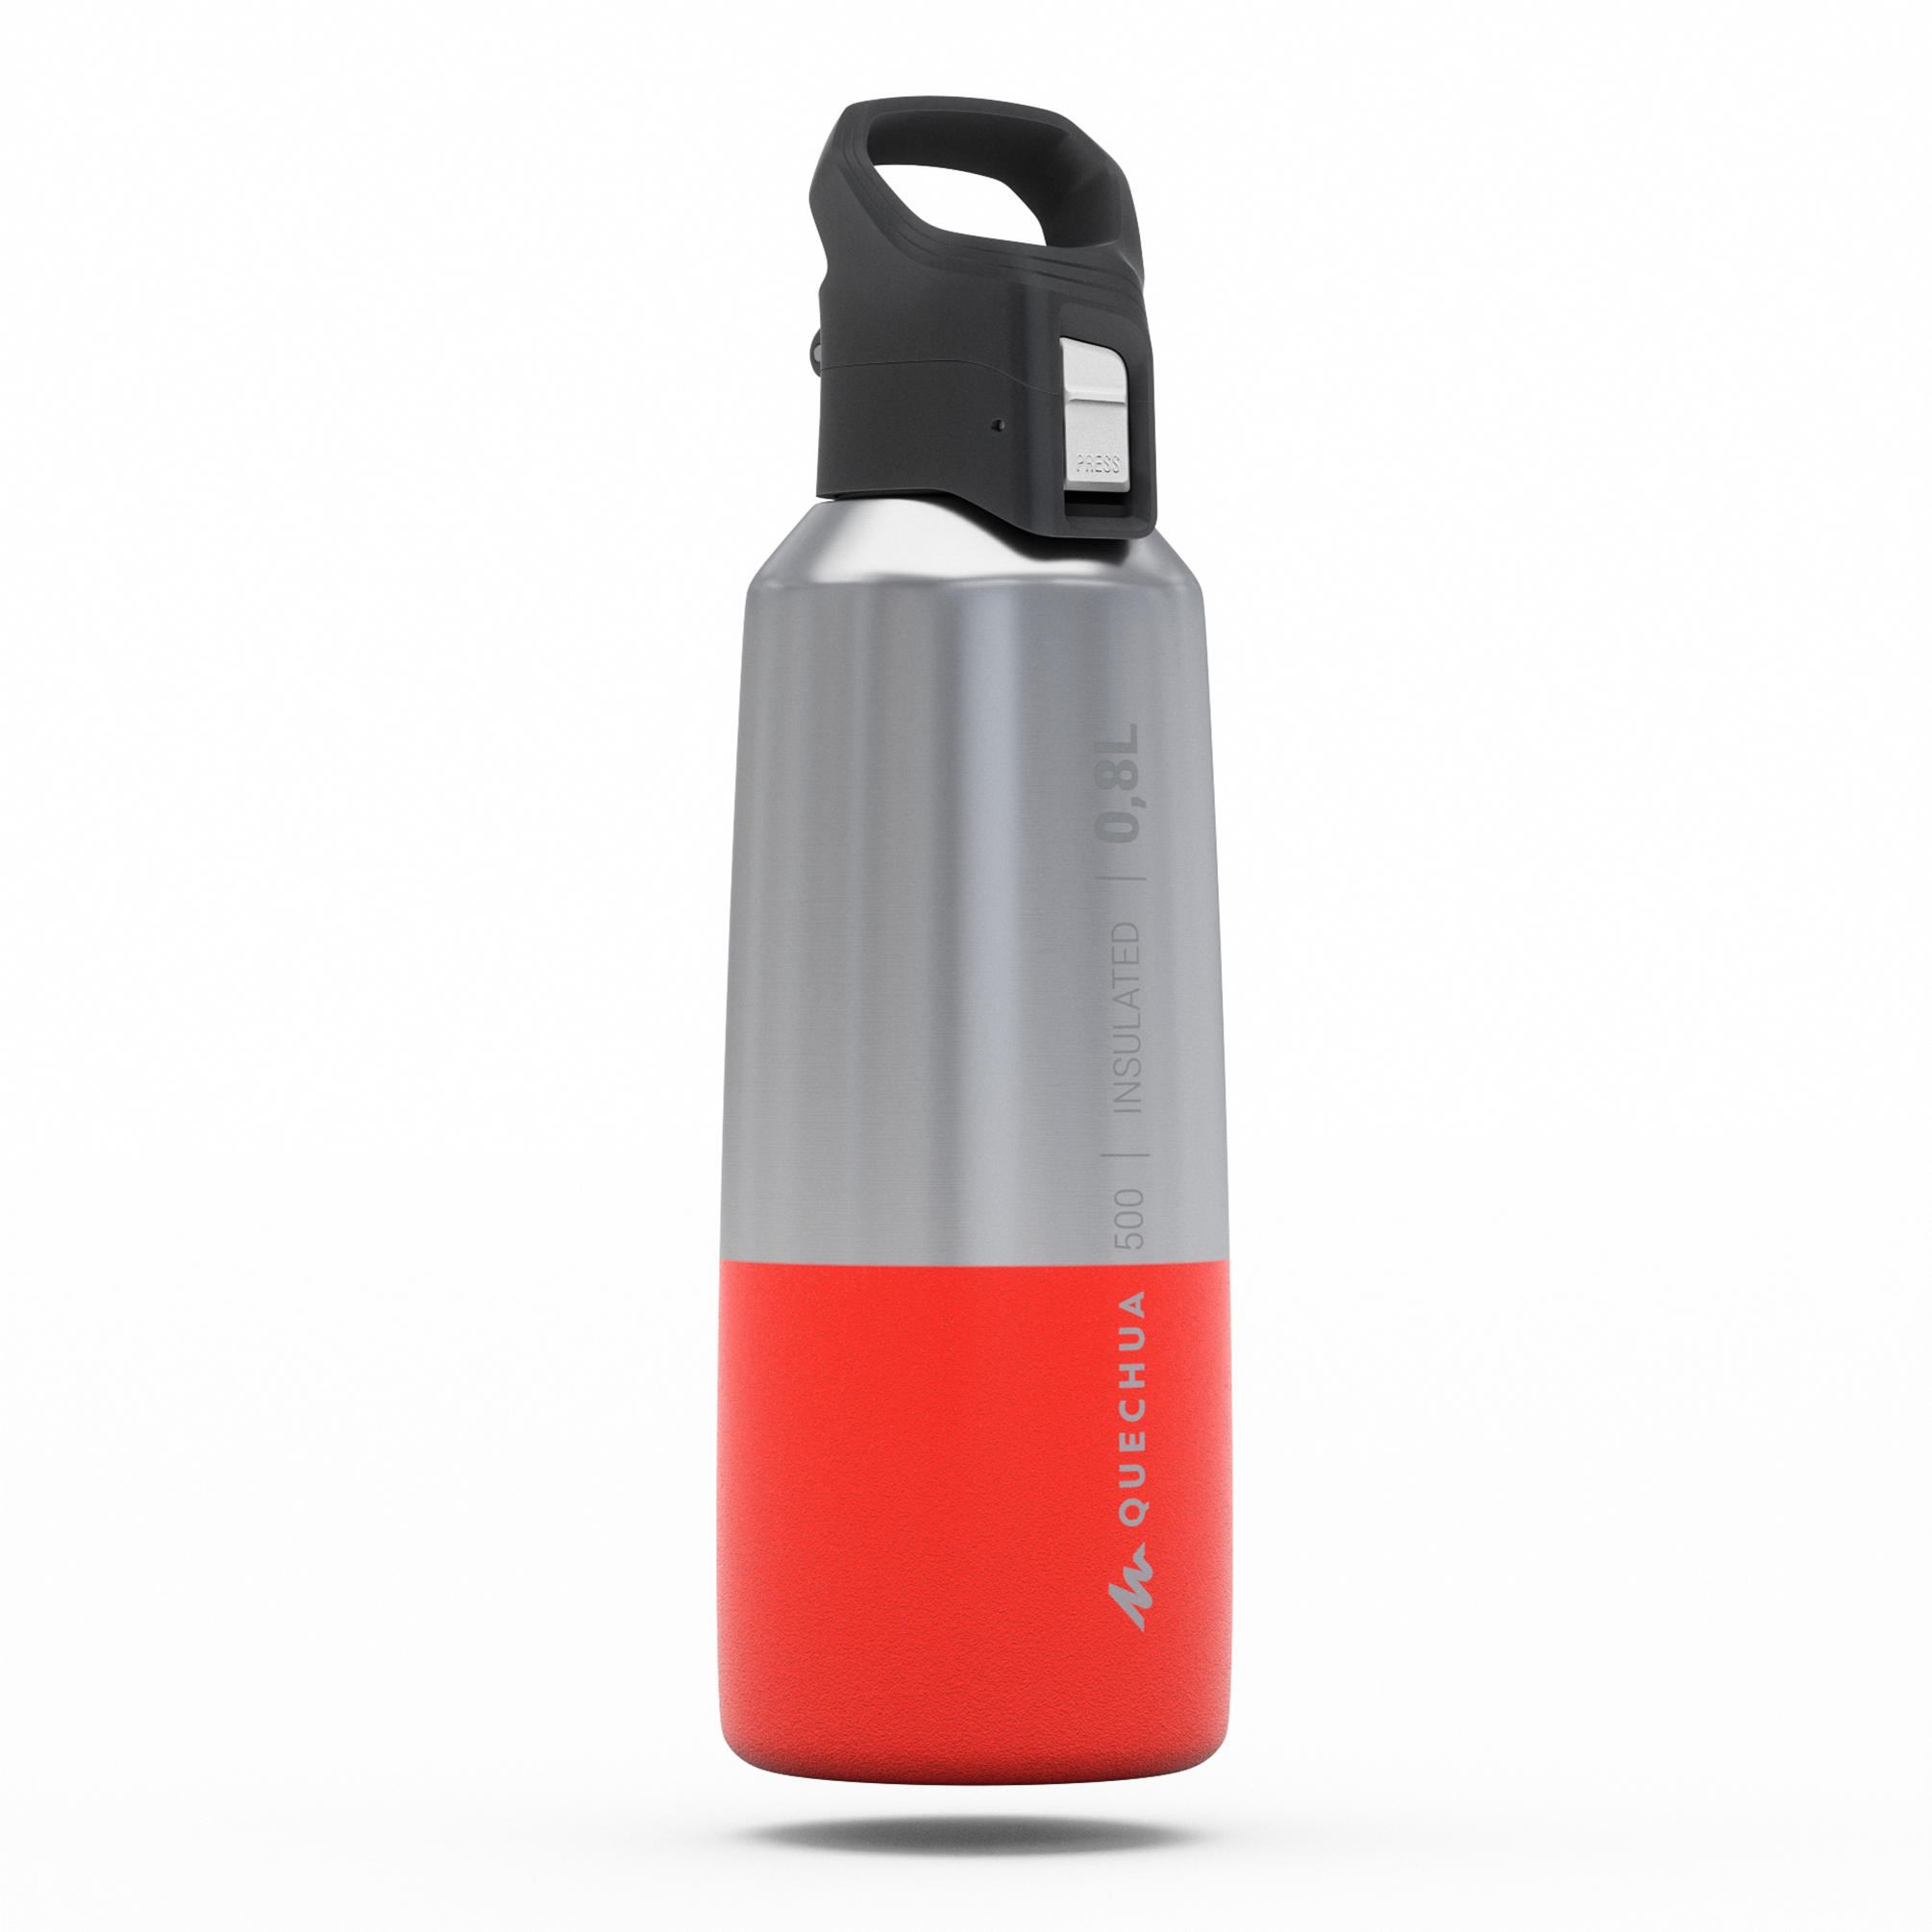 0.8 L stainless steel water bottle with quick-open cap for hiking - Red 30/35